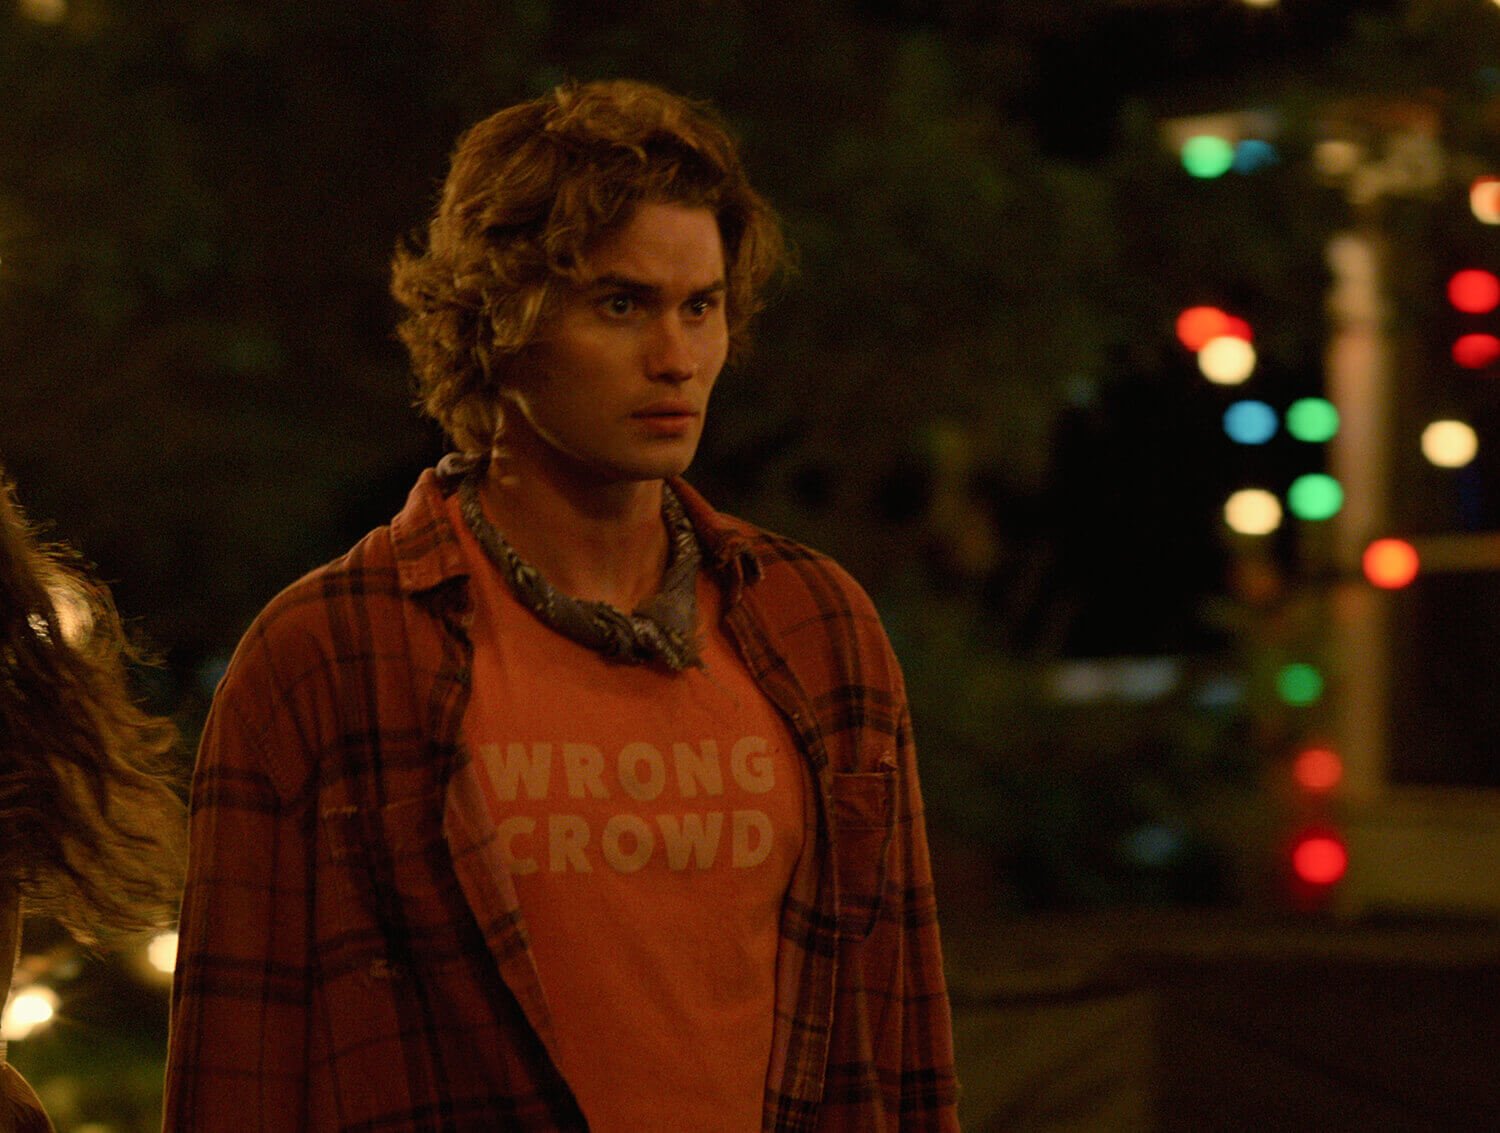 Outer Banks Season 2: Chase Stokes as John B wearing a red flannel, T-shirt, and the alleged shroud bandana around his neck